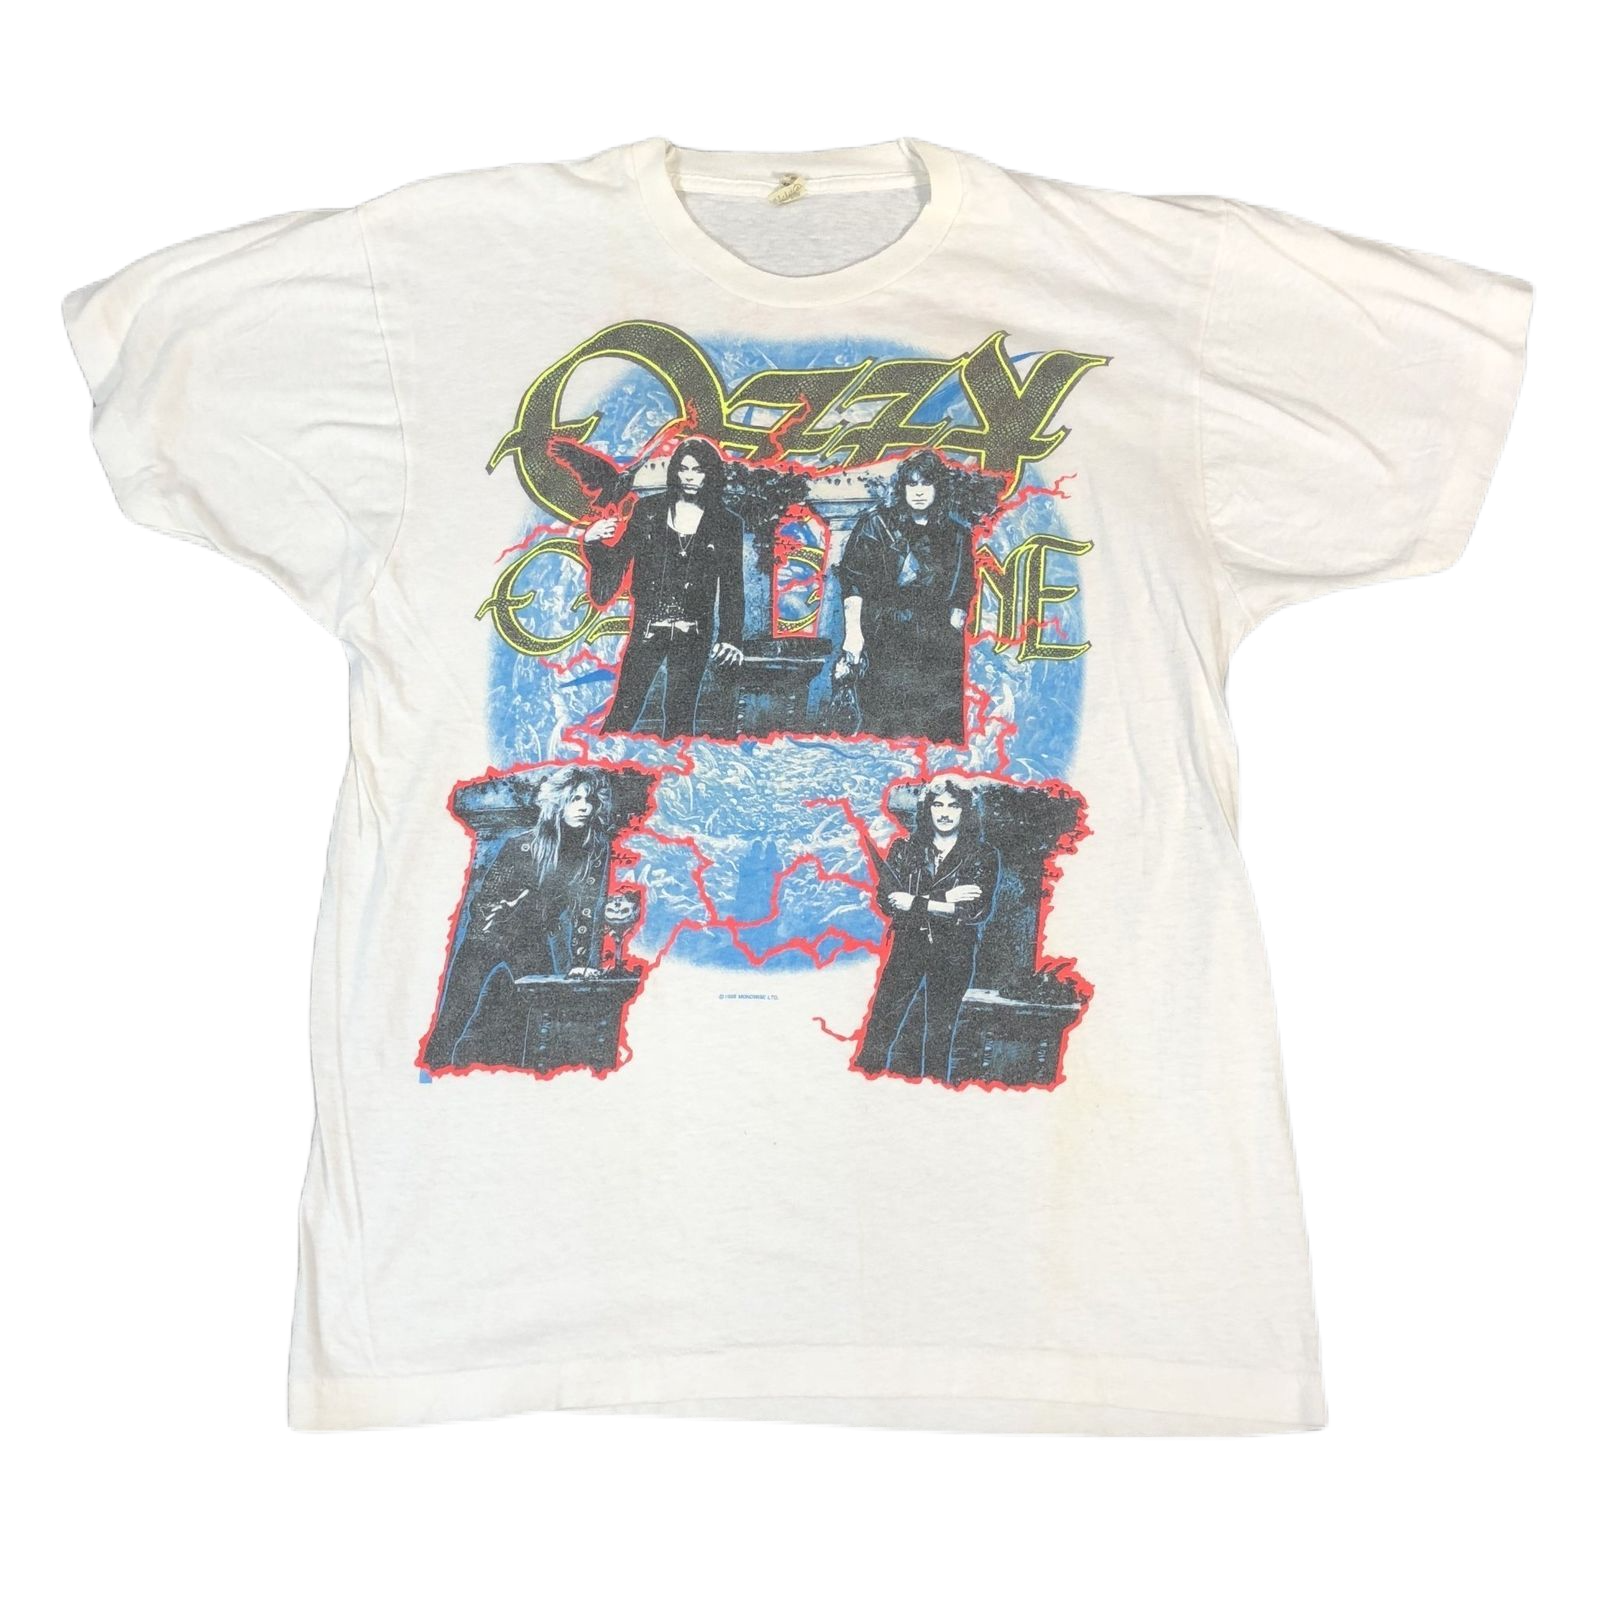 Vintage Ozzy Ozbourne "No Rest For The Wicked Tour '88-89" T-Shirt - jointcustodydc